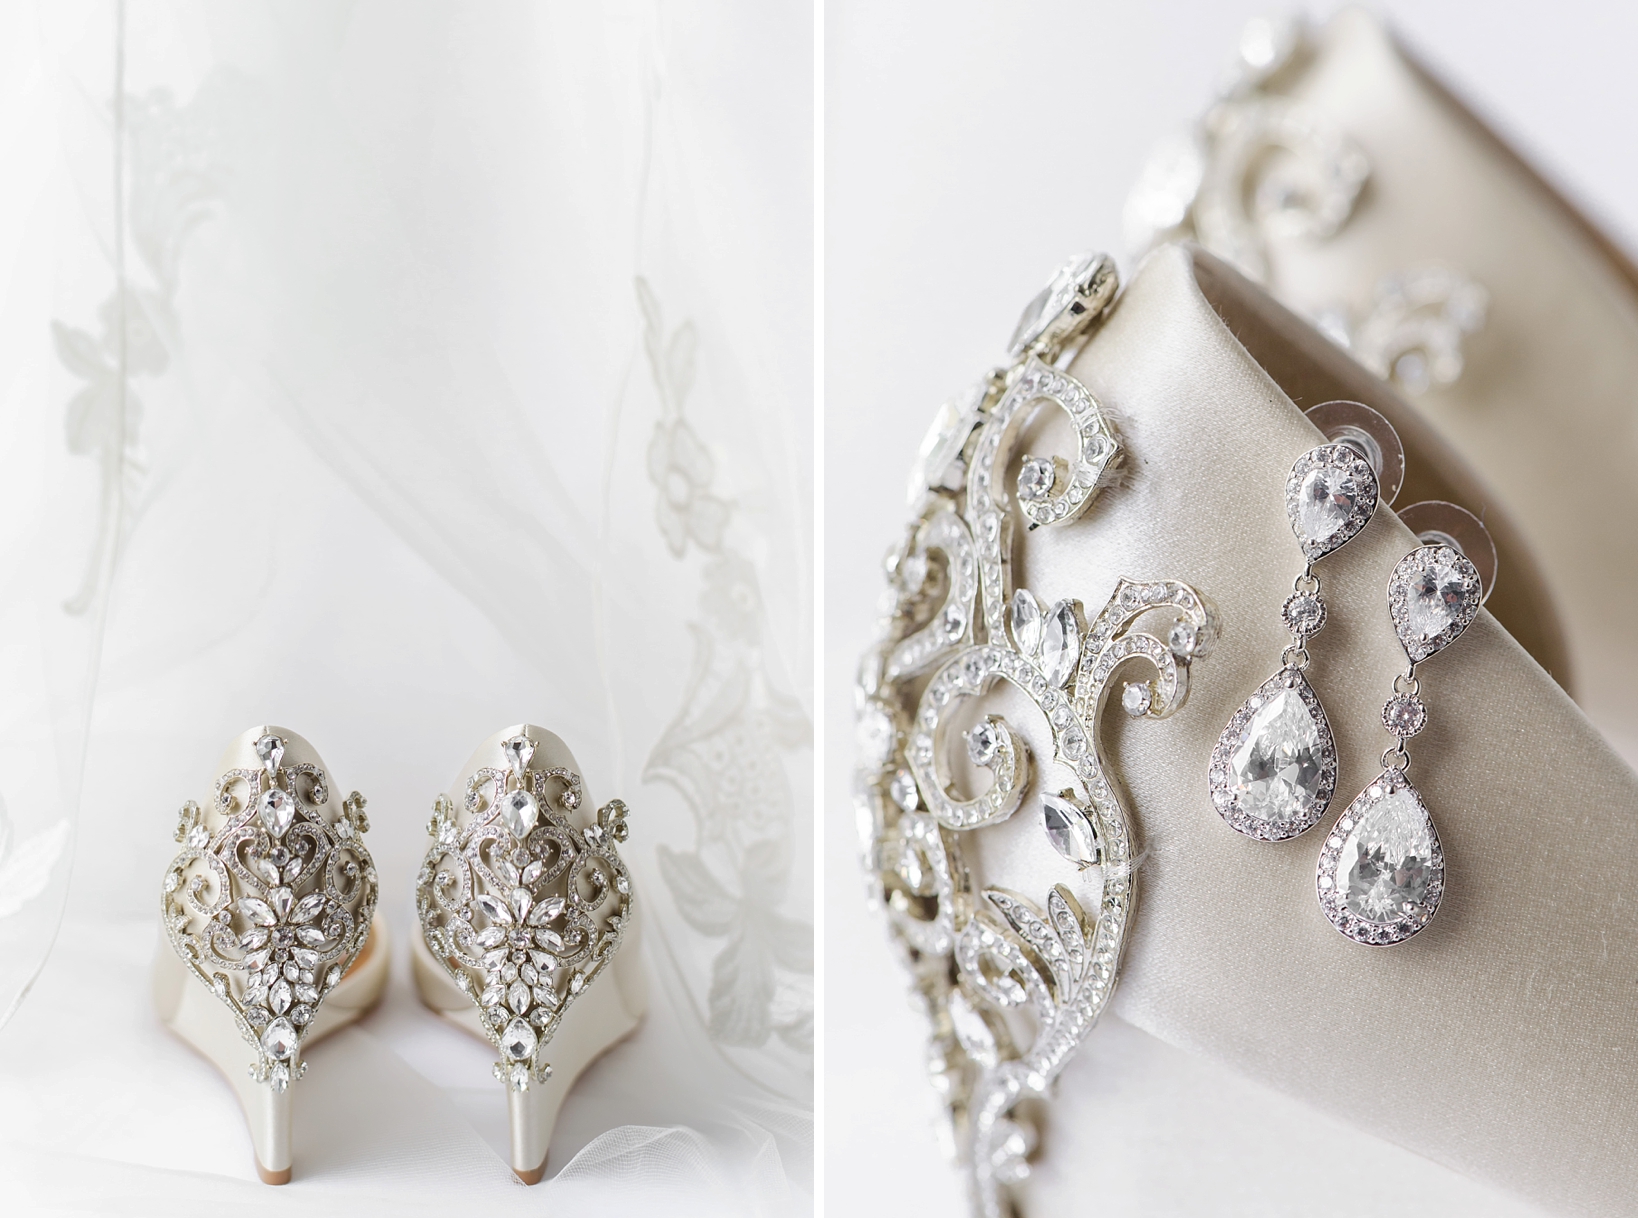 The rhinestone details of the bridal shoes by Sarah & Ben Photography